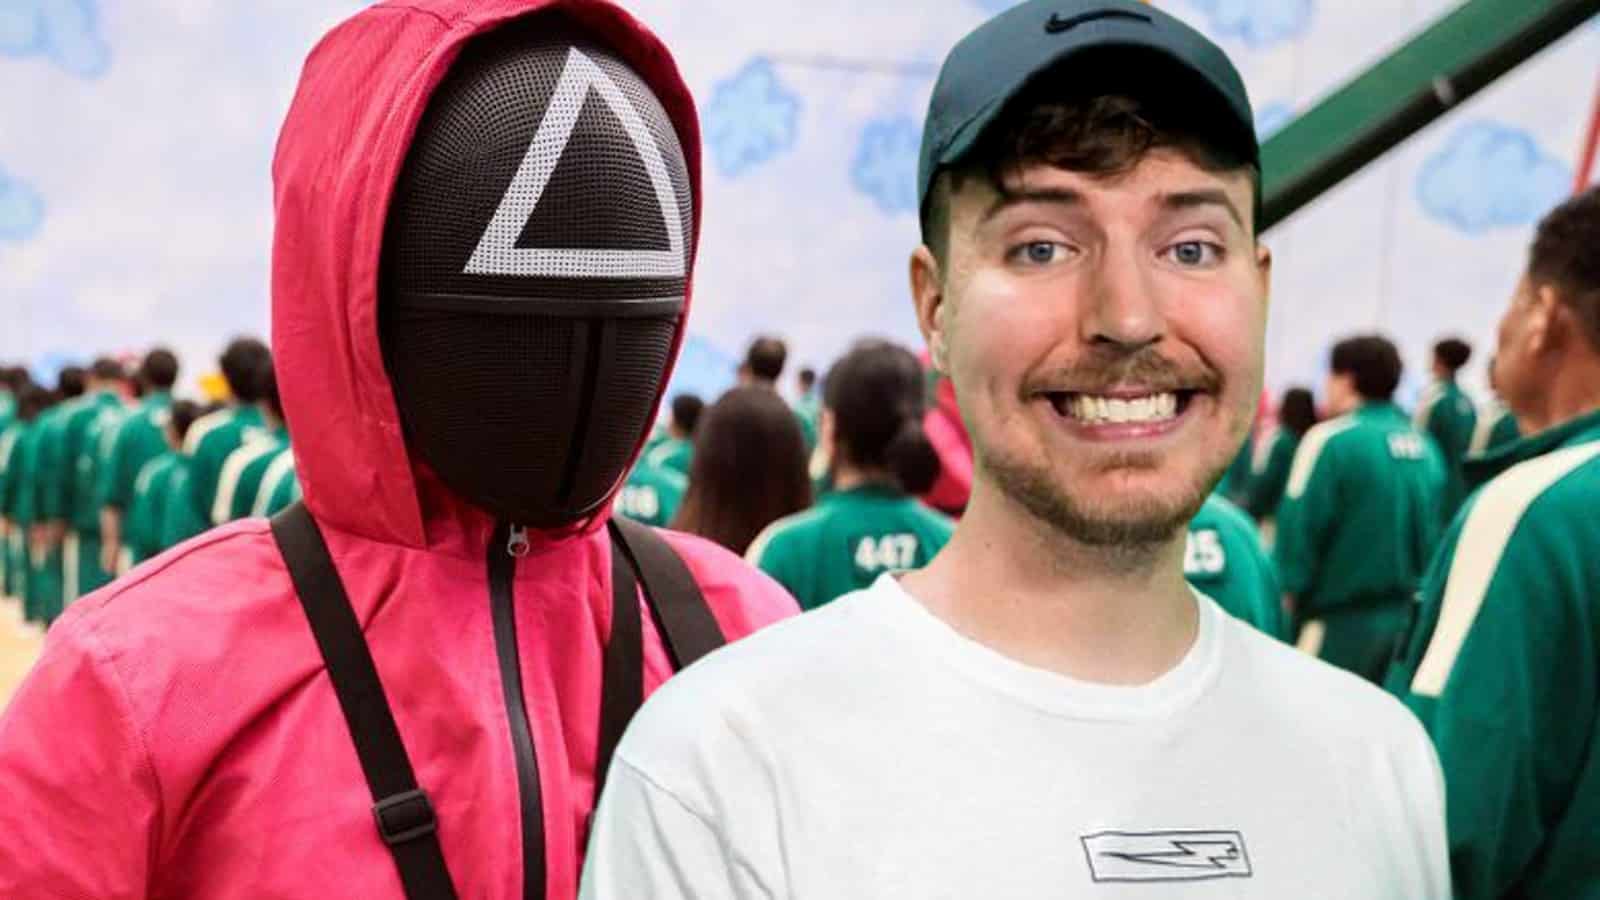 Mr Beast Net Worth in 2023 How Rich is He Now? - News